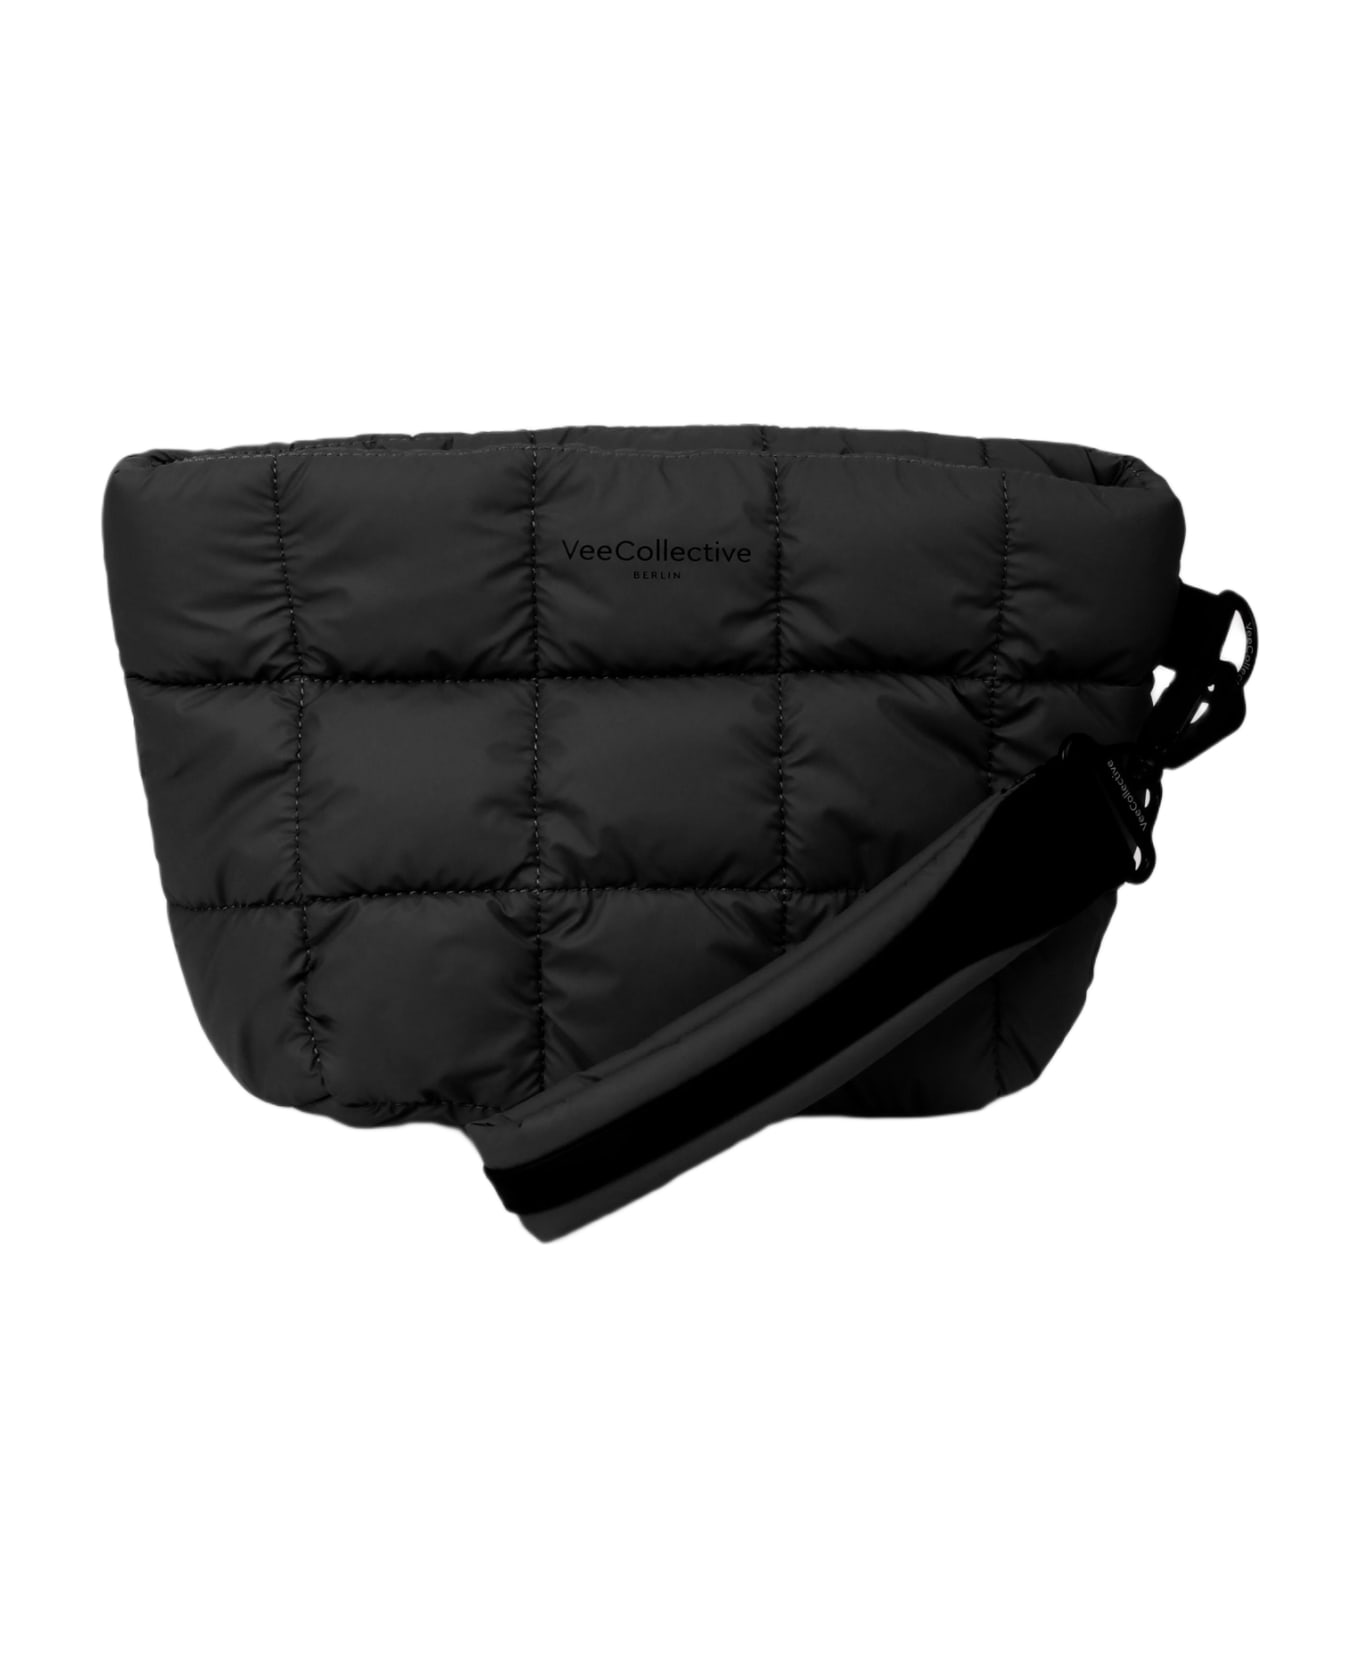 VeeCollective Vee Collective Mini Porter Quilted Shoulder Bag ショルダーバッグ